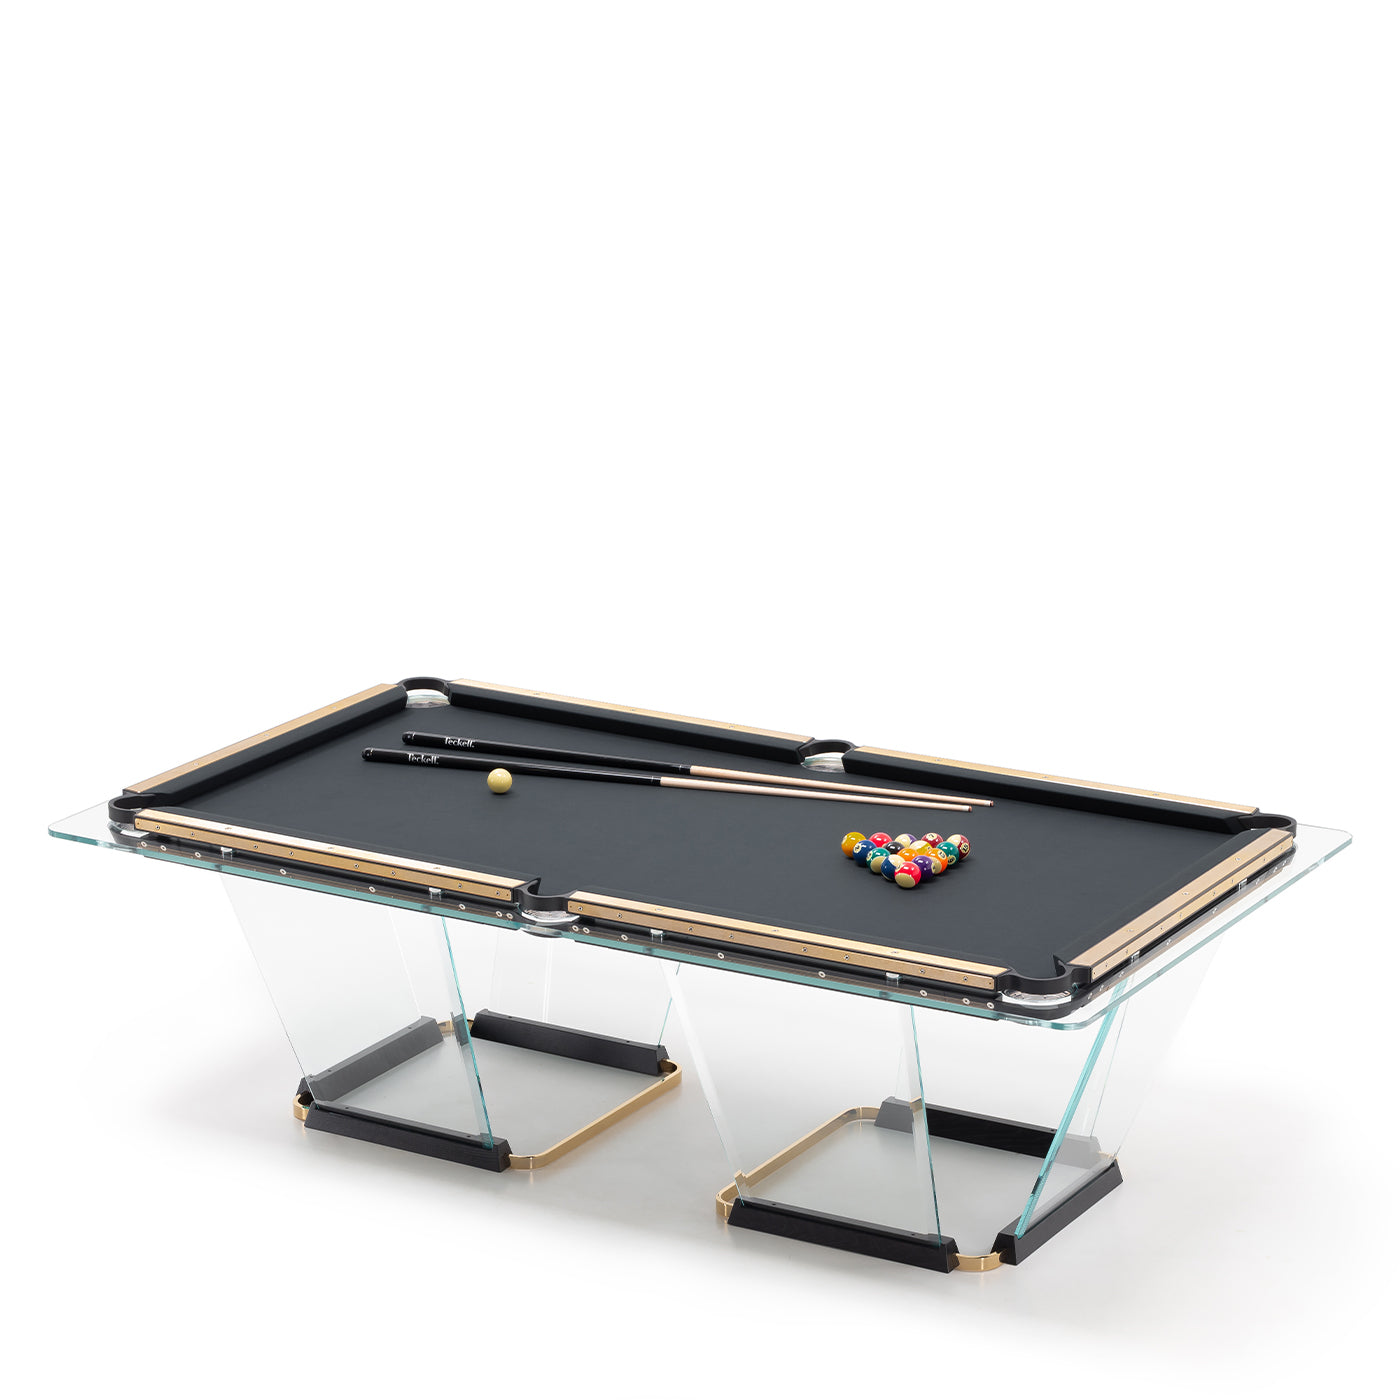 T1.3 Gold 24K Limited edition Pool Table - 8ft - Alternative view 1